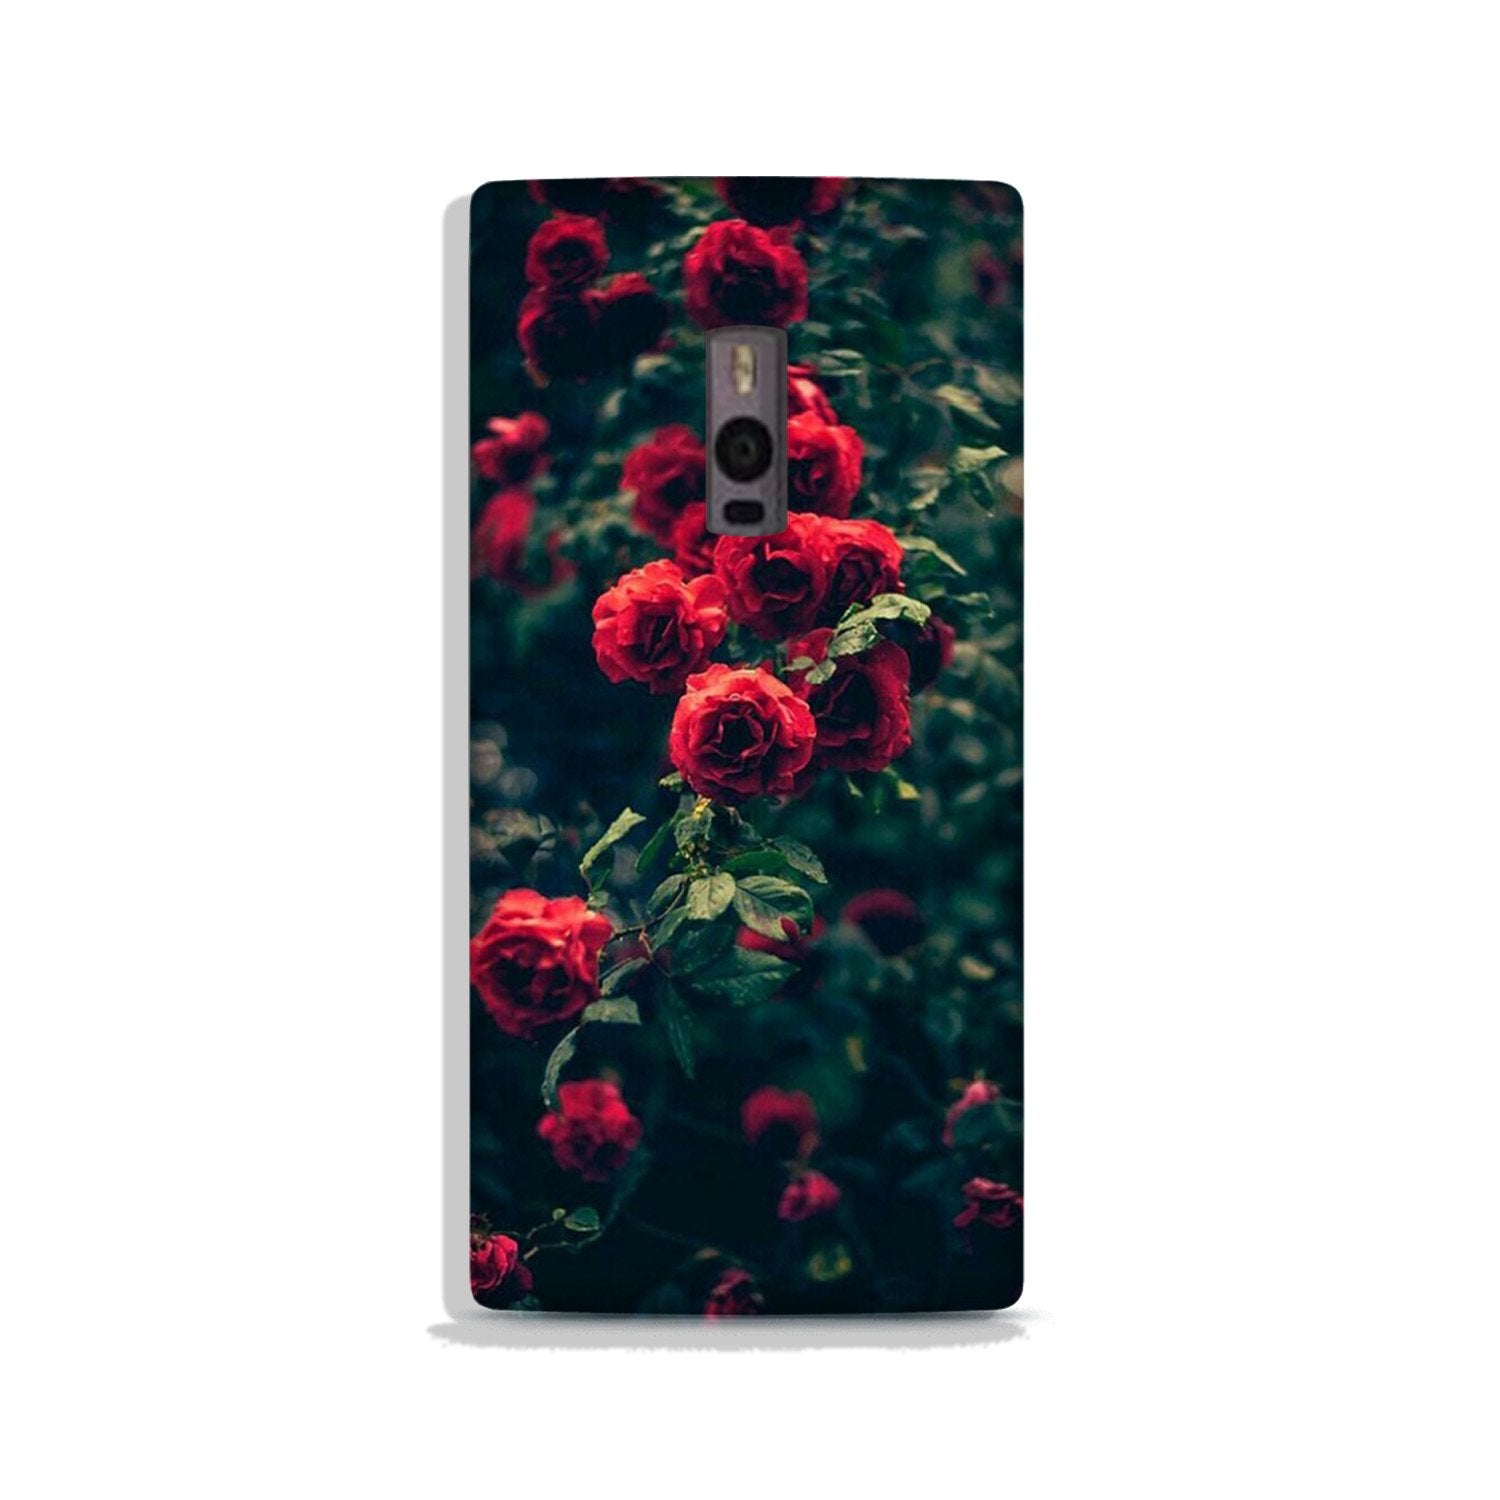 Red Rose Case for OnePlus 2